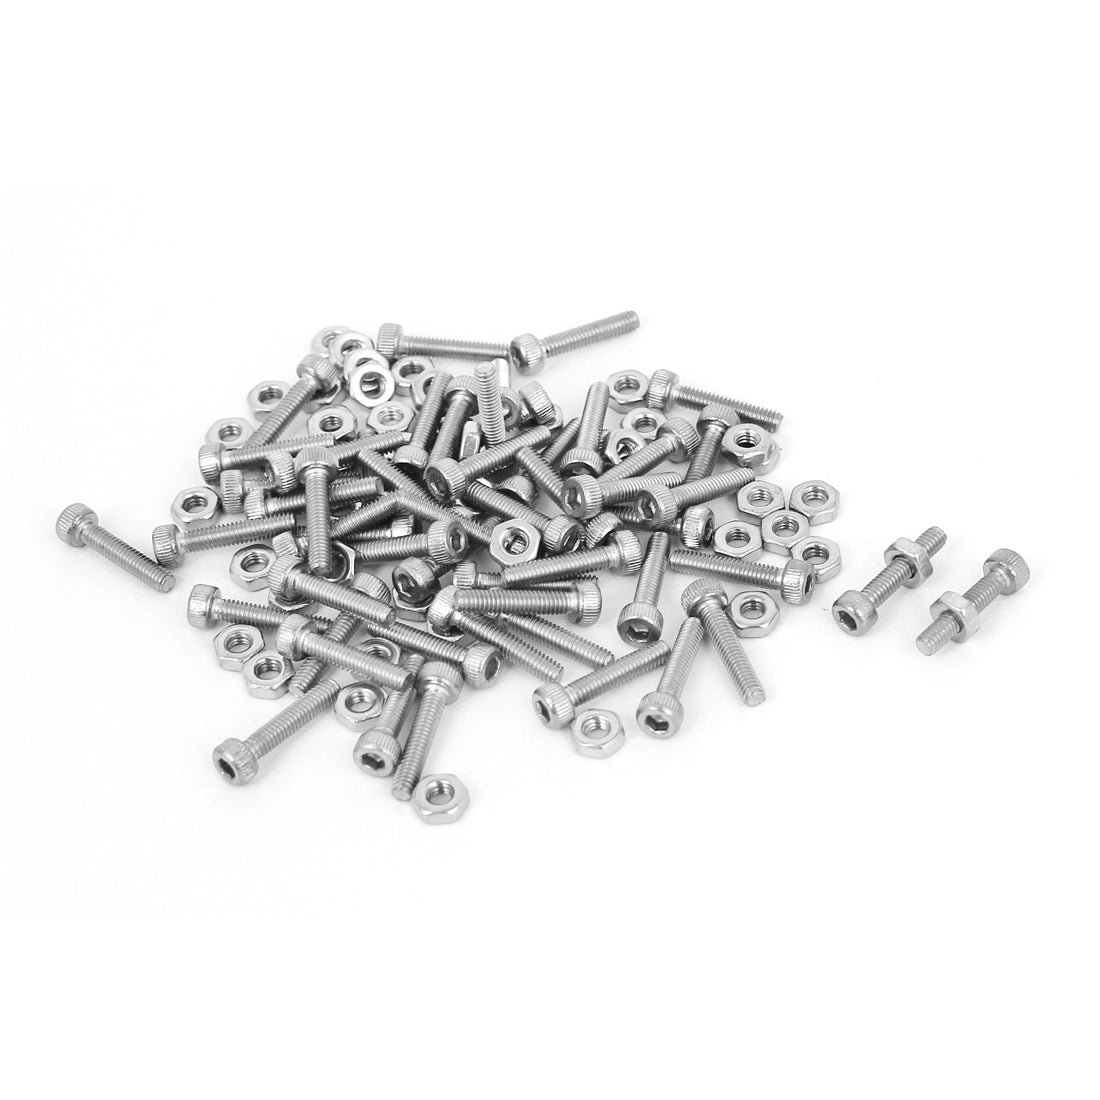 uxcell Uxcell M2.5x12mm Stainless Steel Hex Socket Head Knurled Cap Screws Bolts Nut Set 50Pcs